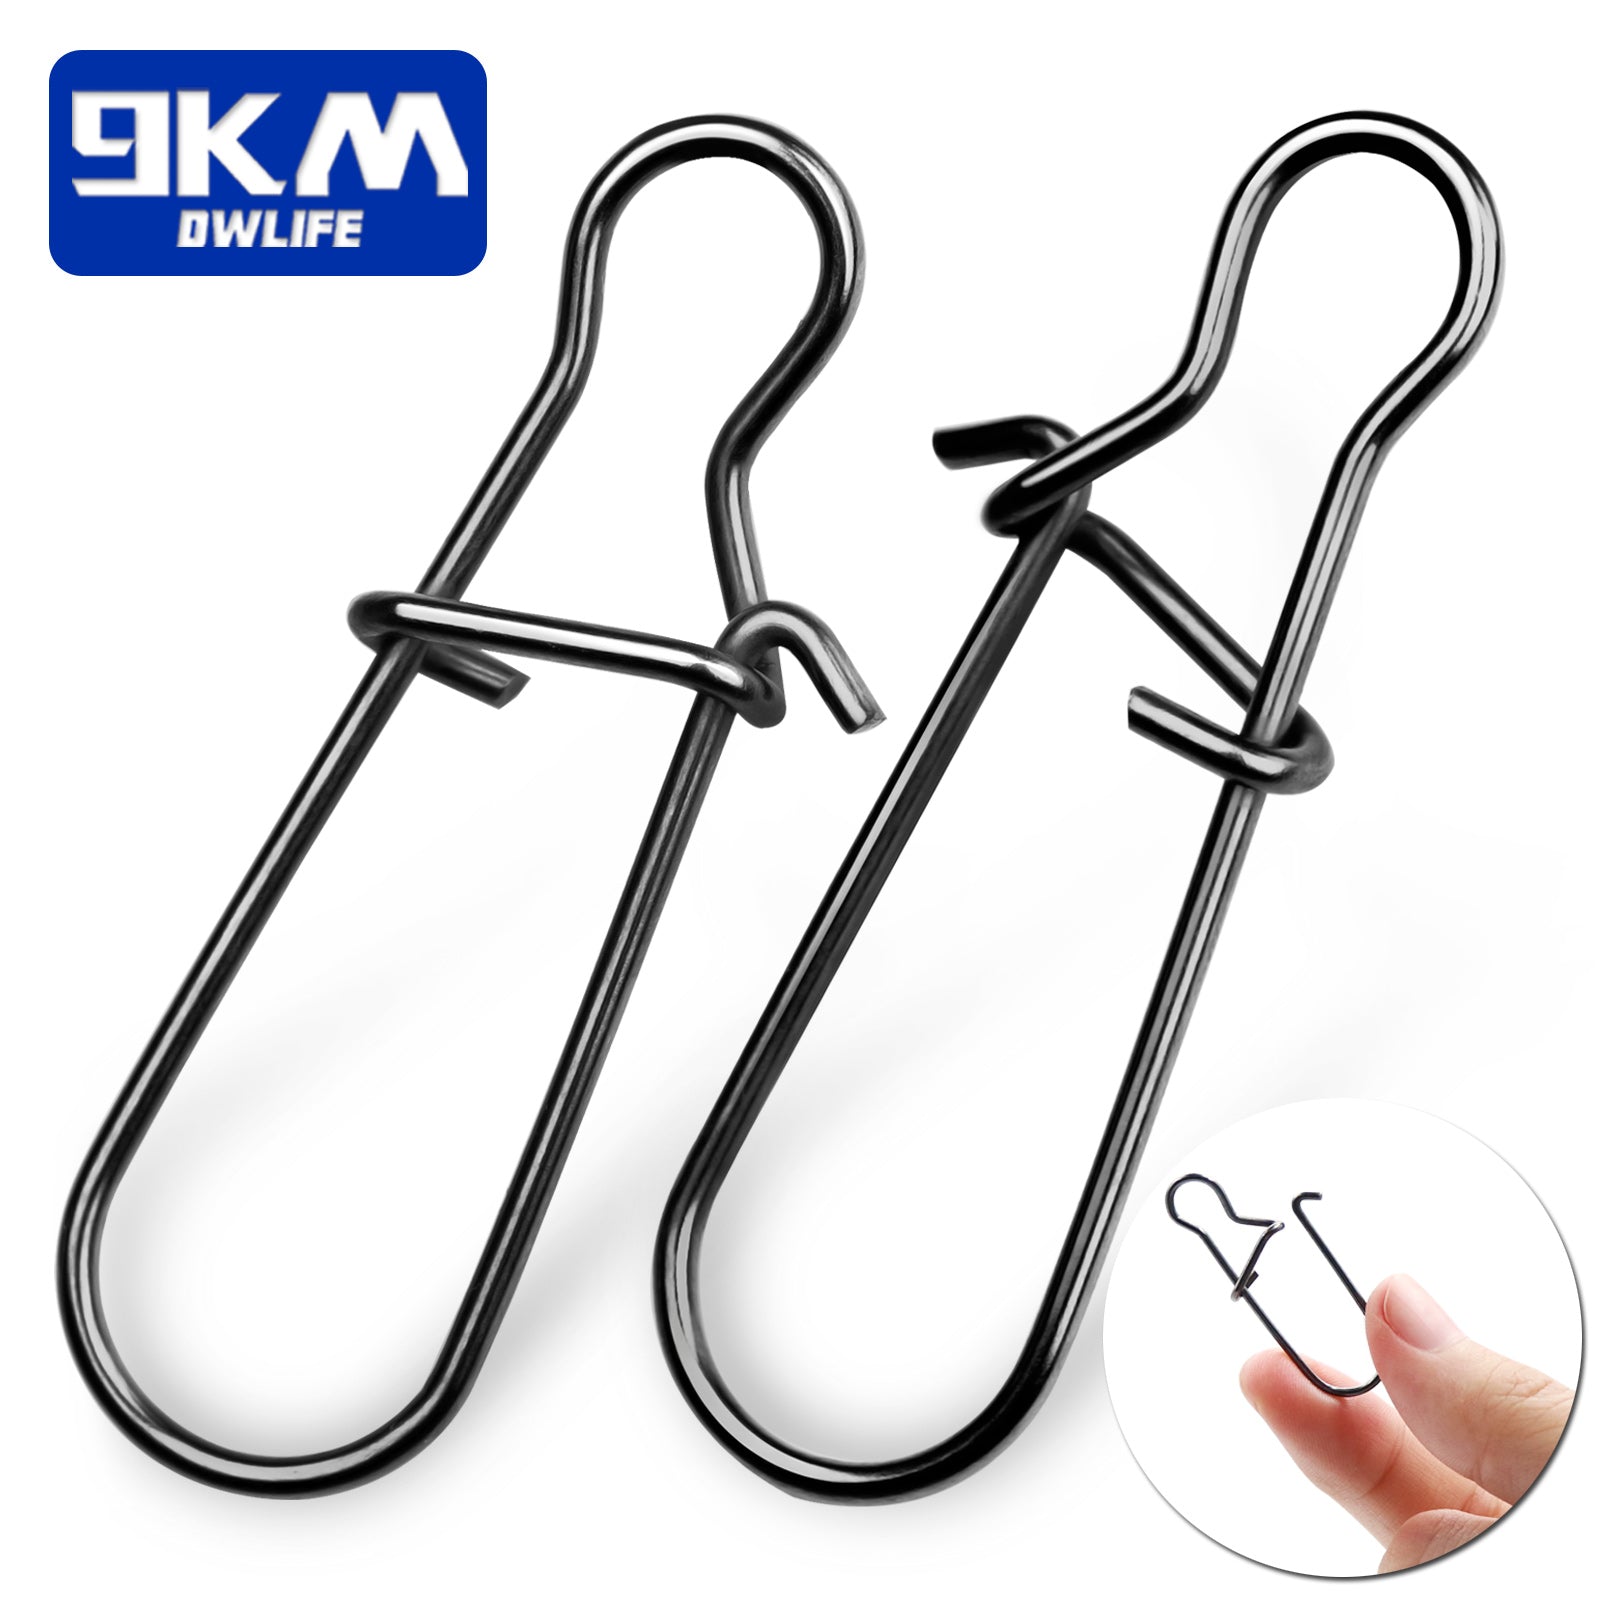 Snap Fishing Swivels Safety Snap Hook Lock Stainless Steel Fishing